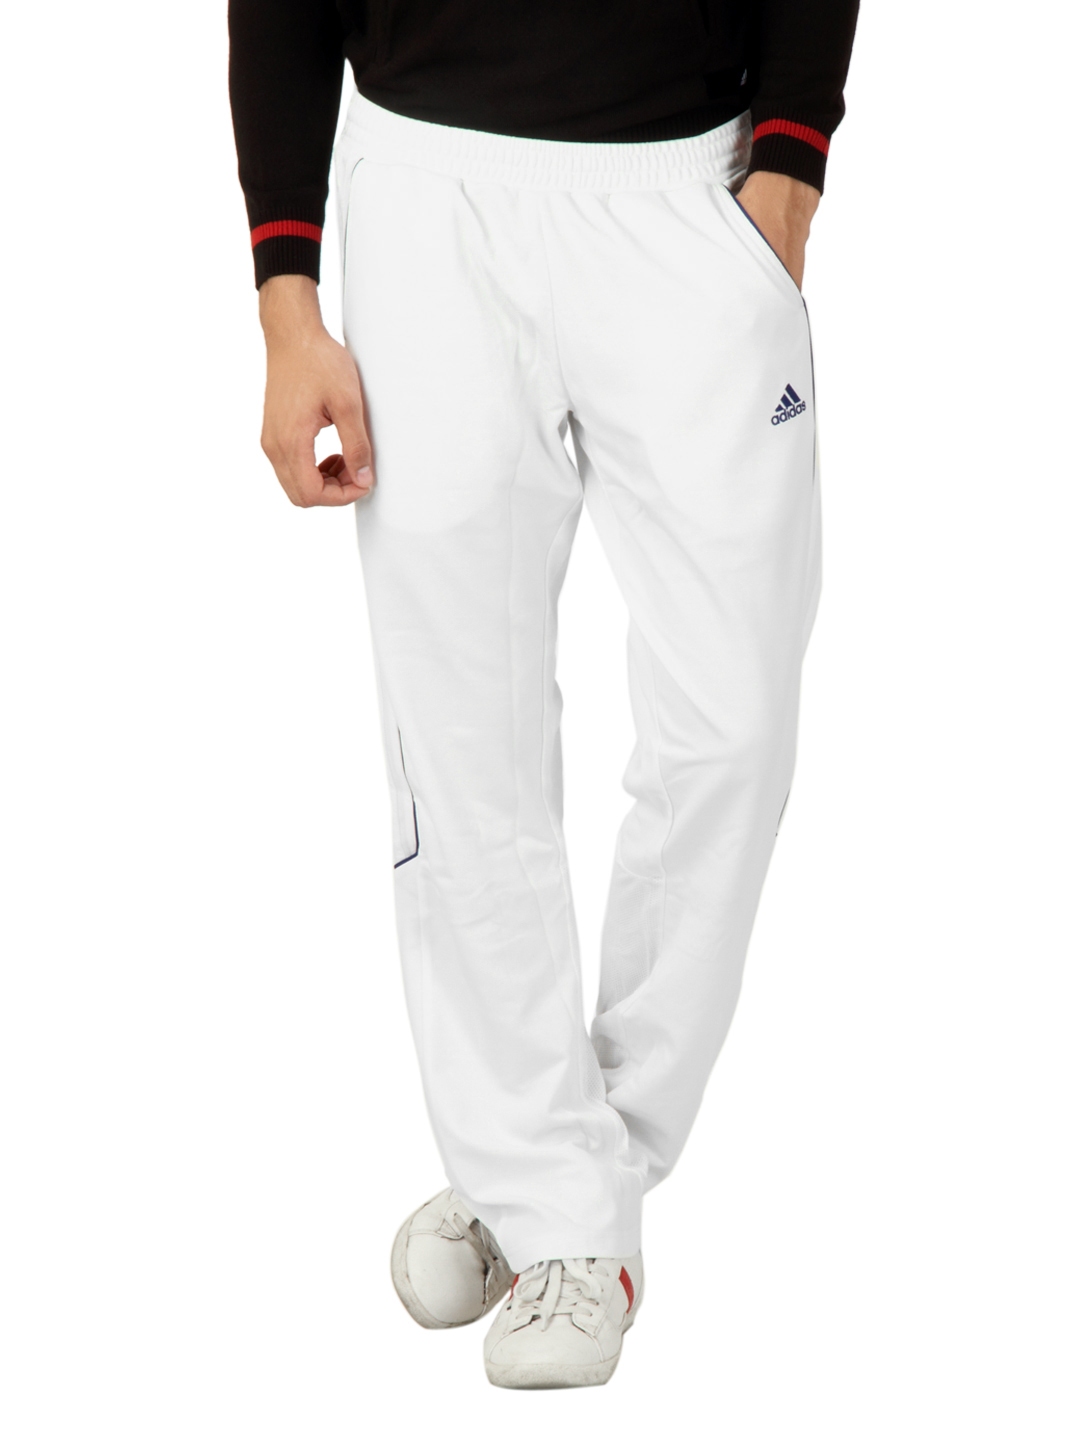 Adult Adidas cricket playing trousers